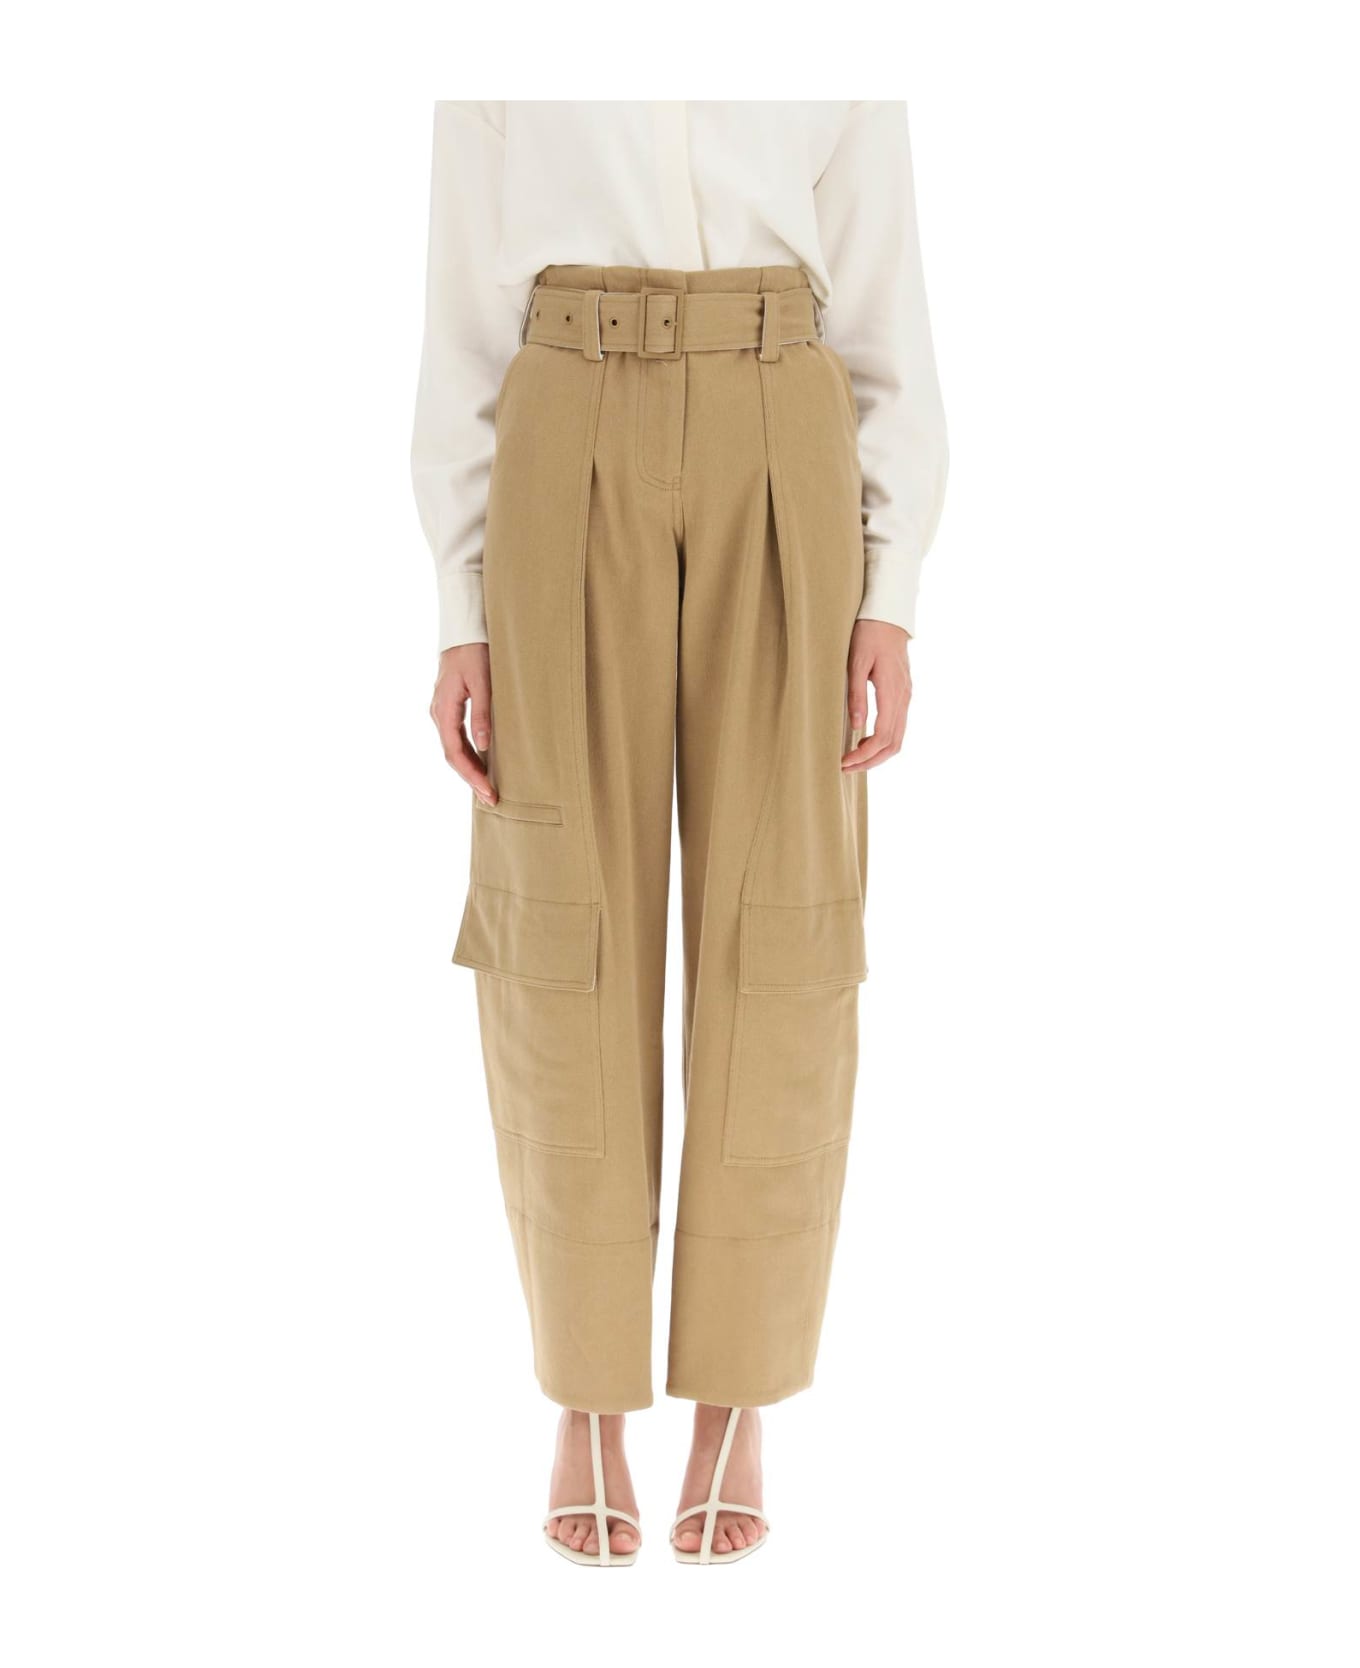 Low Classic Cargo Pants With Matching Belt - BEIGE (Beige)